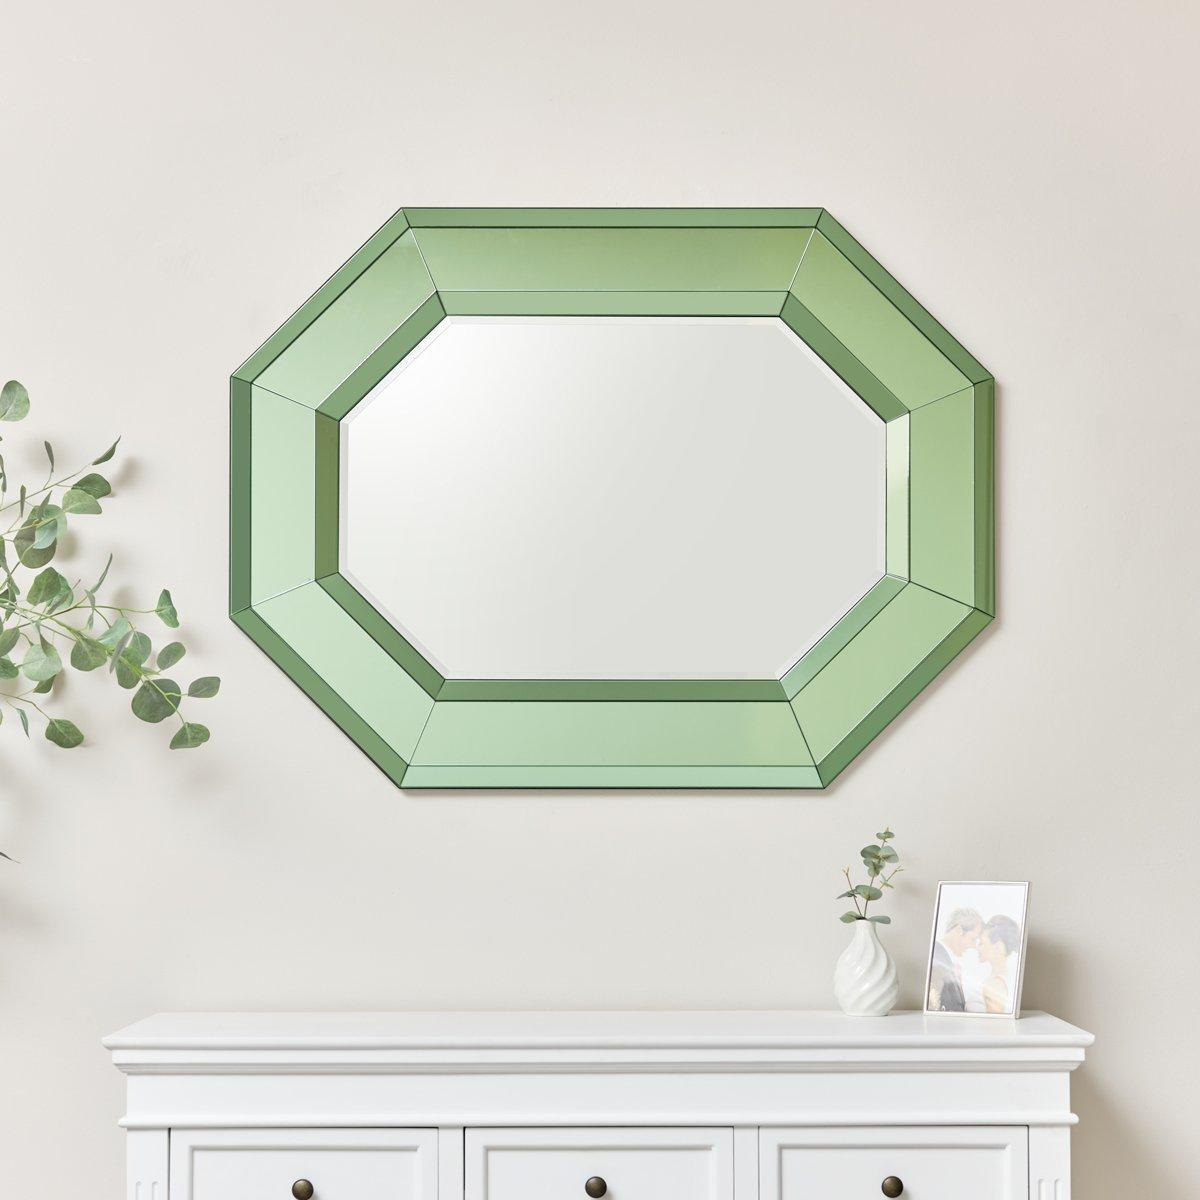 Extra Large Green Glass Octagon Wall Mirror 105cm X 80cm - image 1